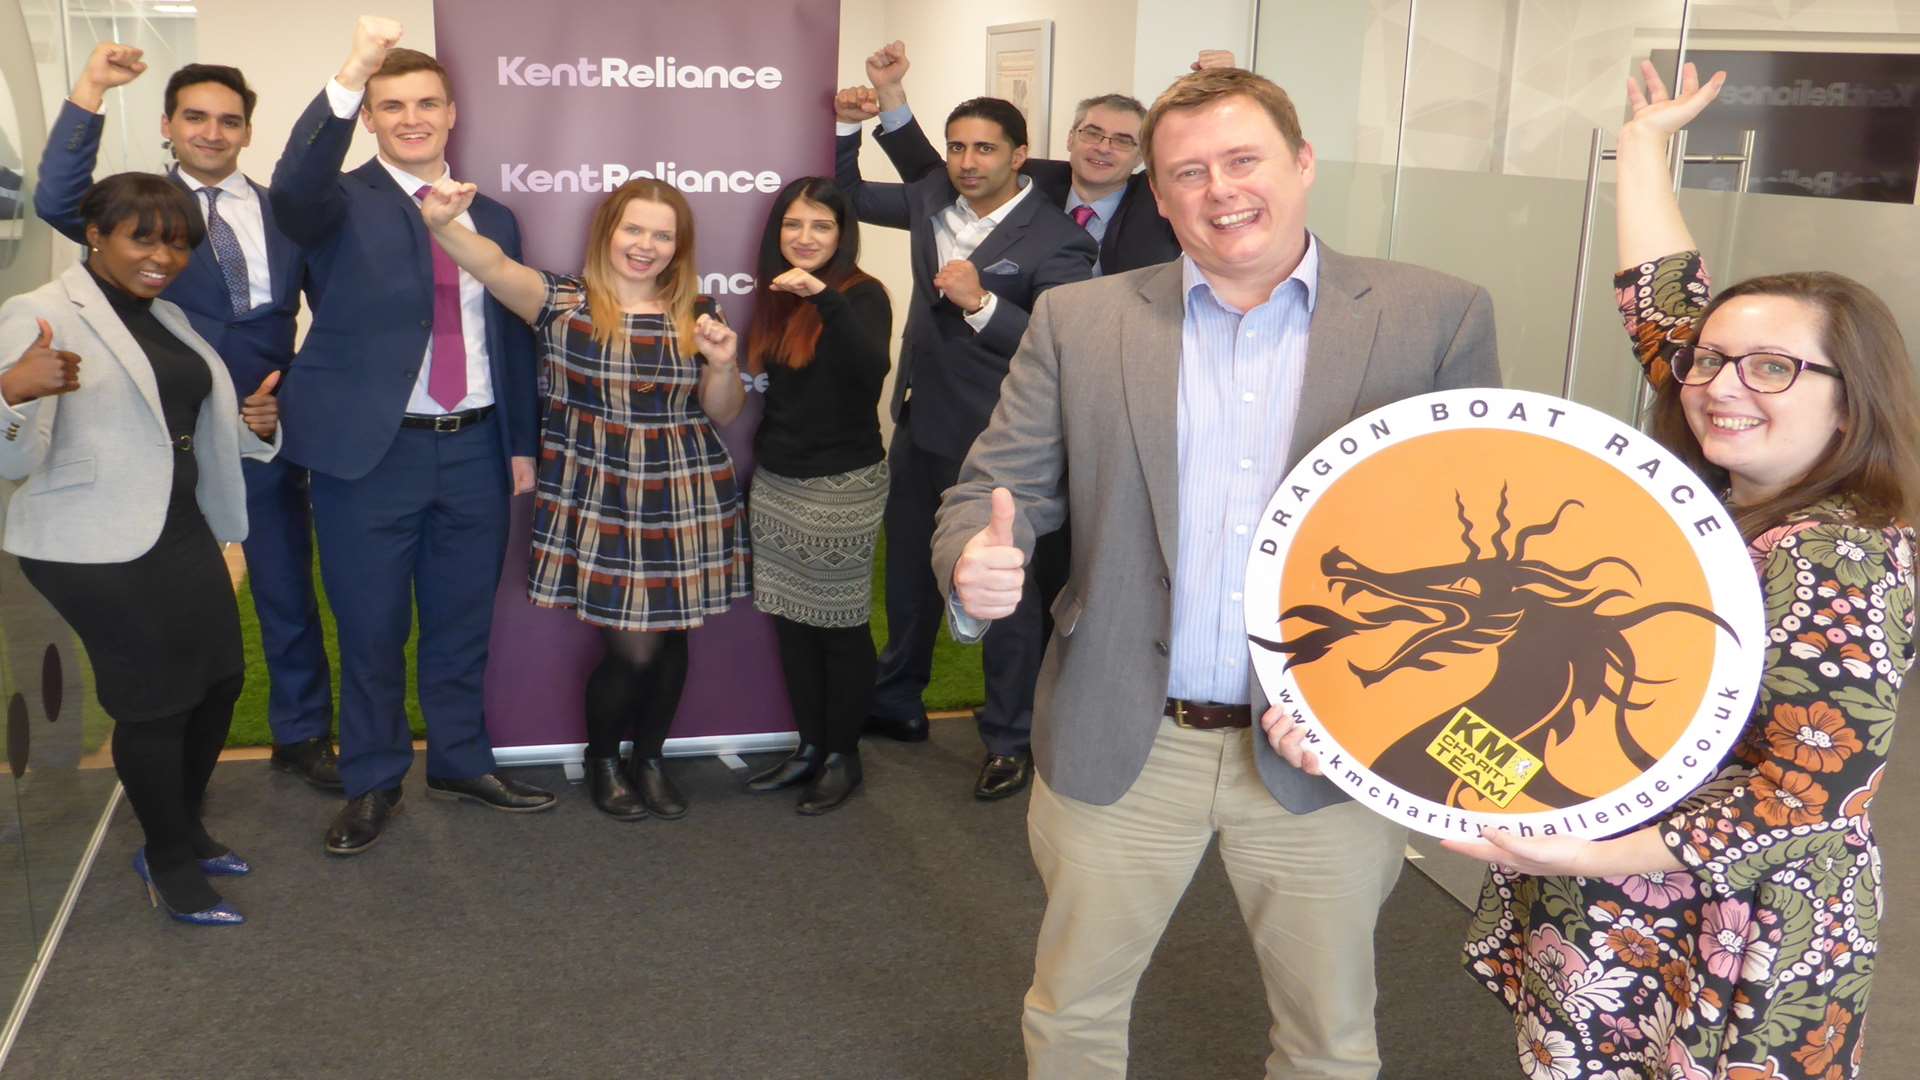 Robert Gurr and Polly Viccars of Kent Reliance announce support of 2016 KM Dragon Boat Race